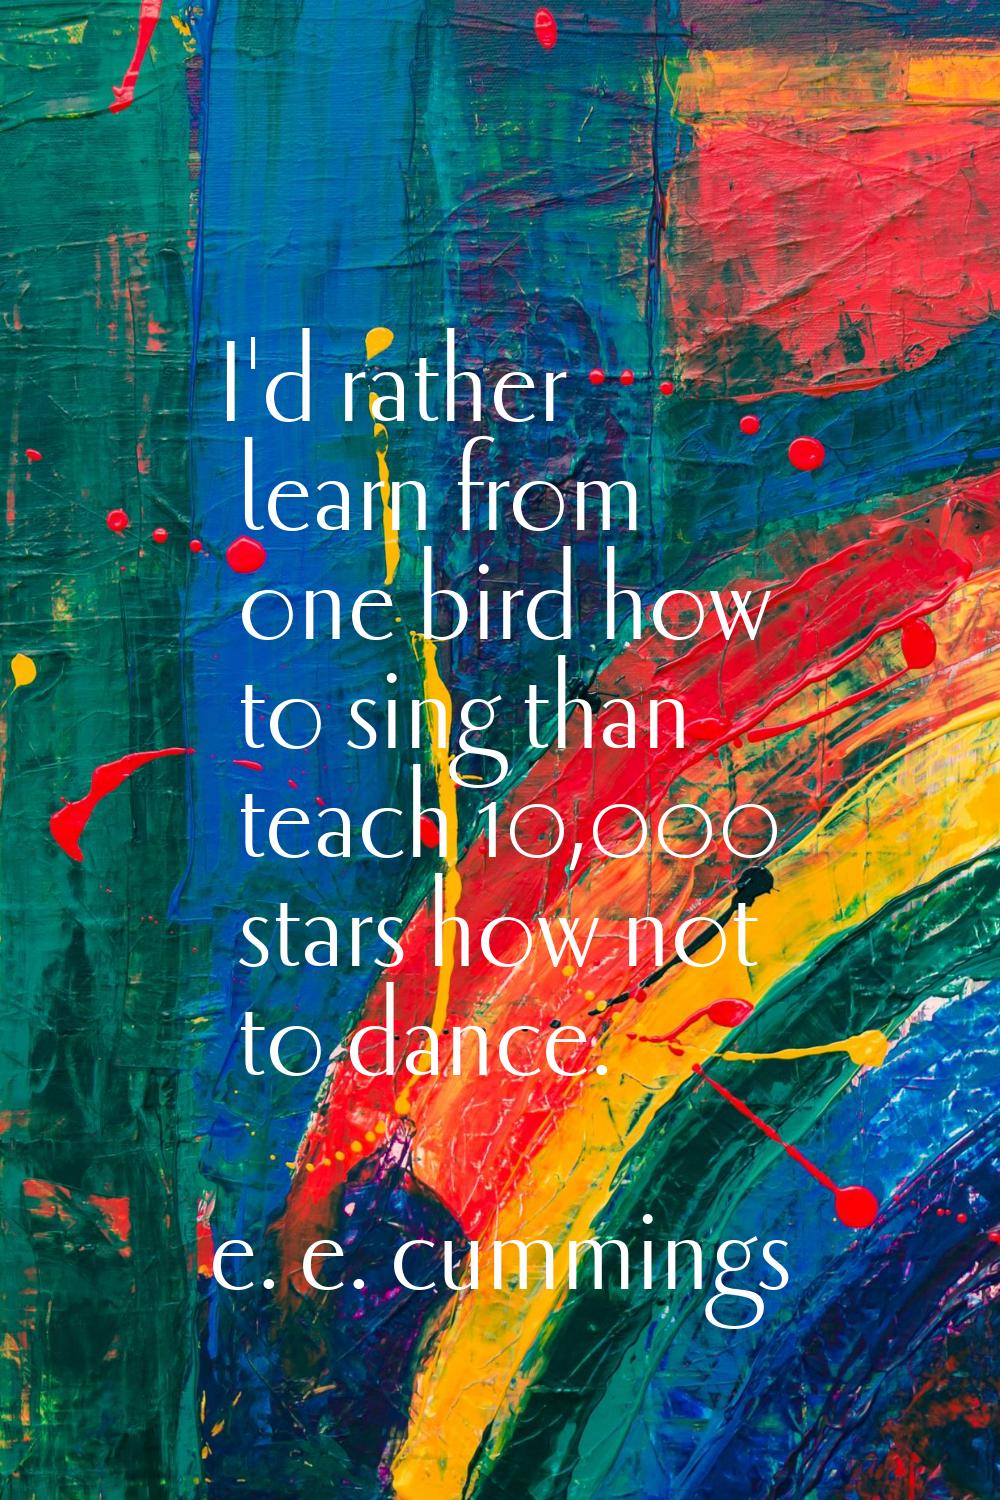 I'd rather learn from one bird how to sing than teach 10,000 stars how not to dance.